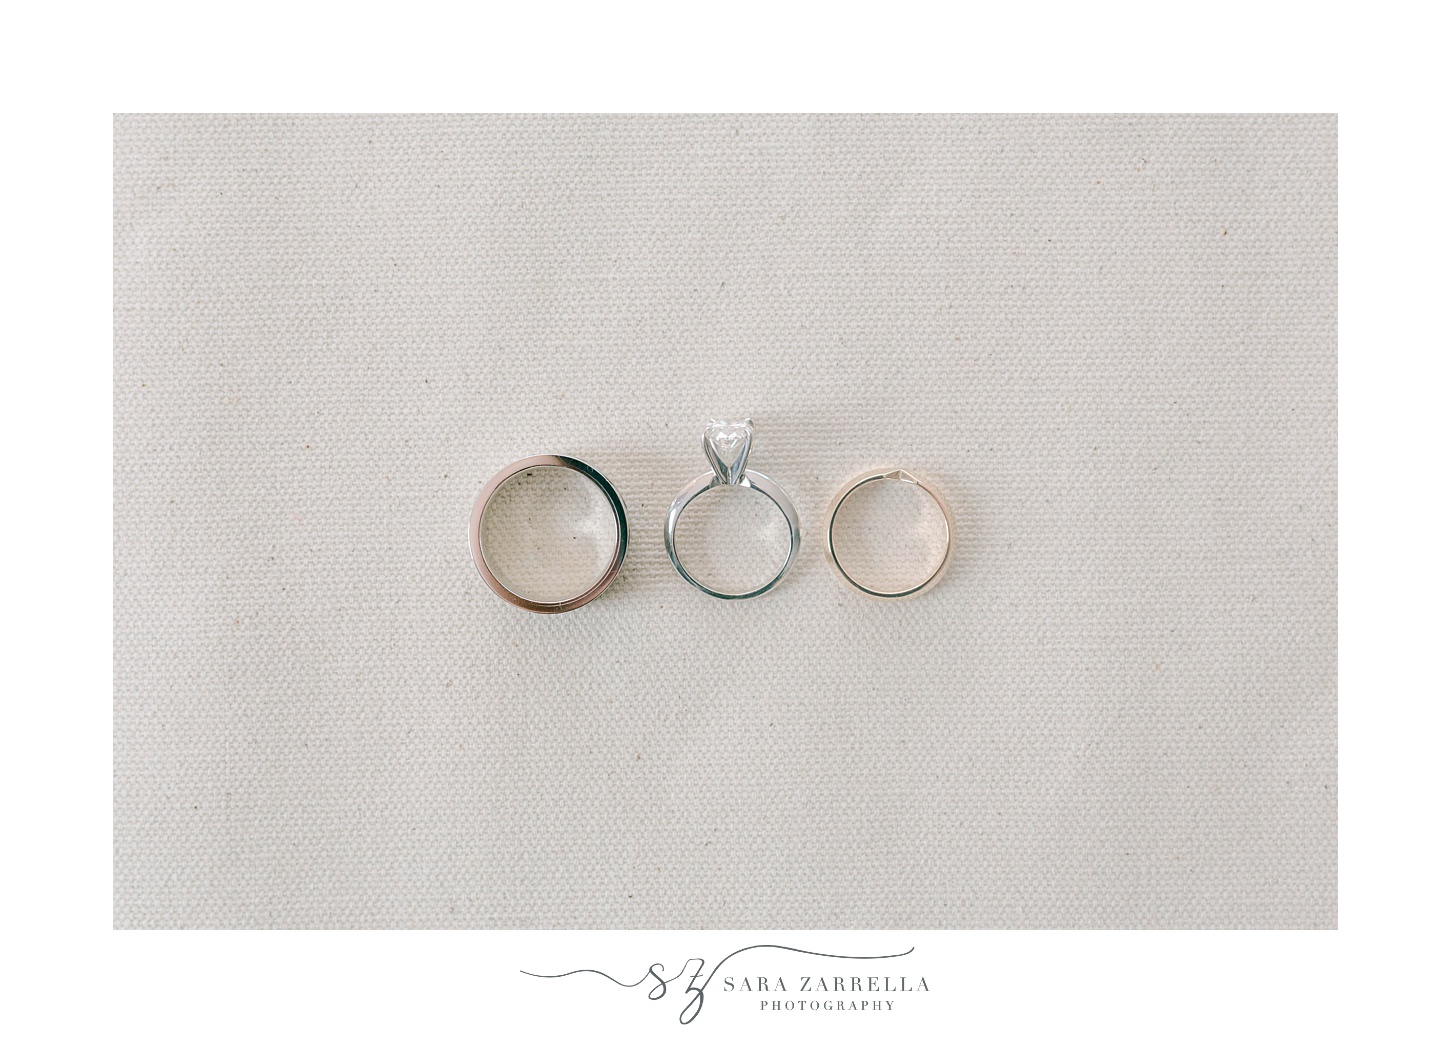 wedding rings lay on ivory backdrop